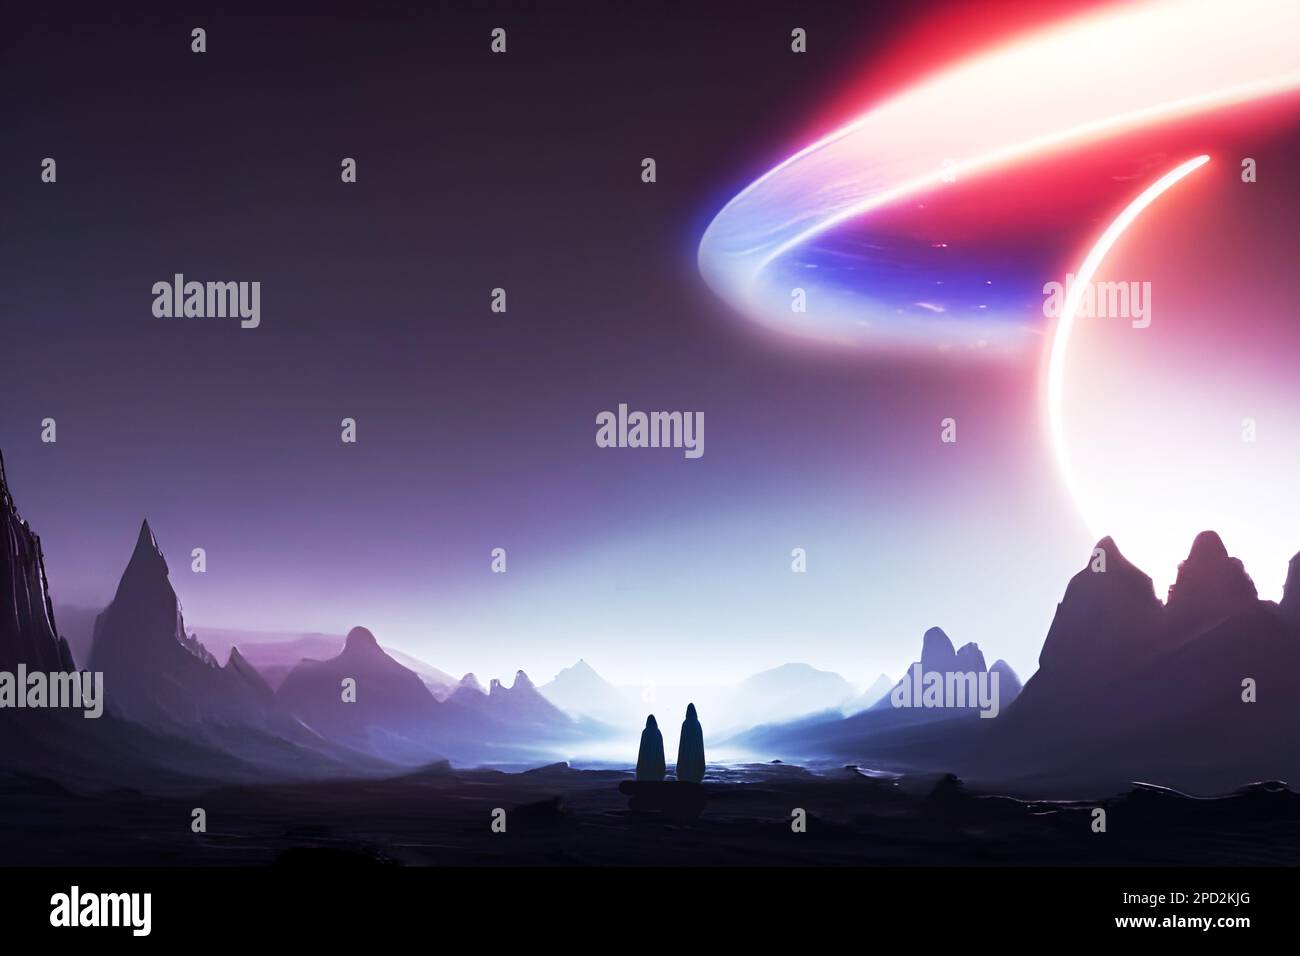 Fantasy extraterrestrial landscape with aliens and glowing satellites. Stock Photo